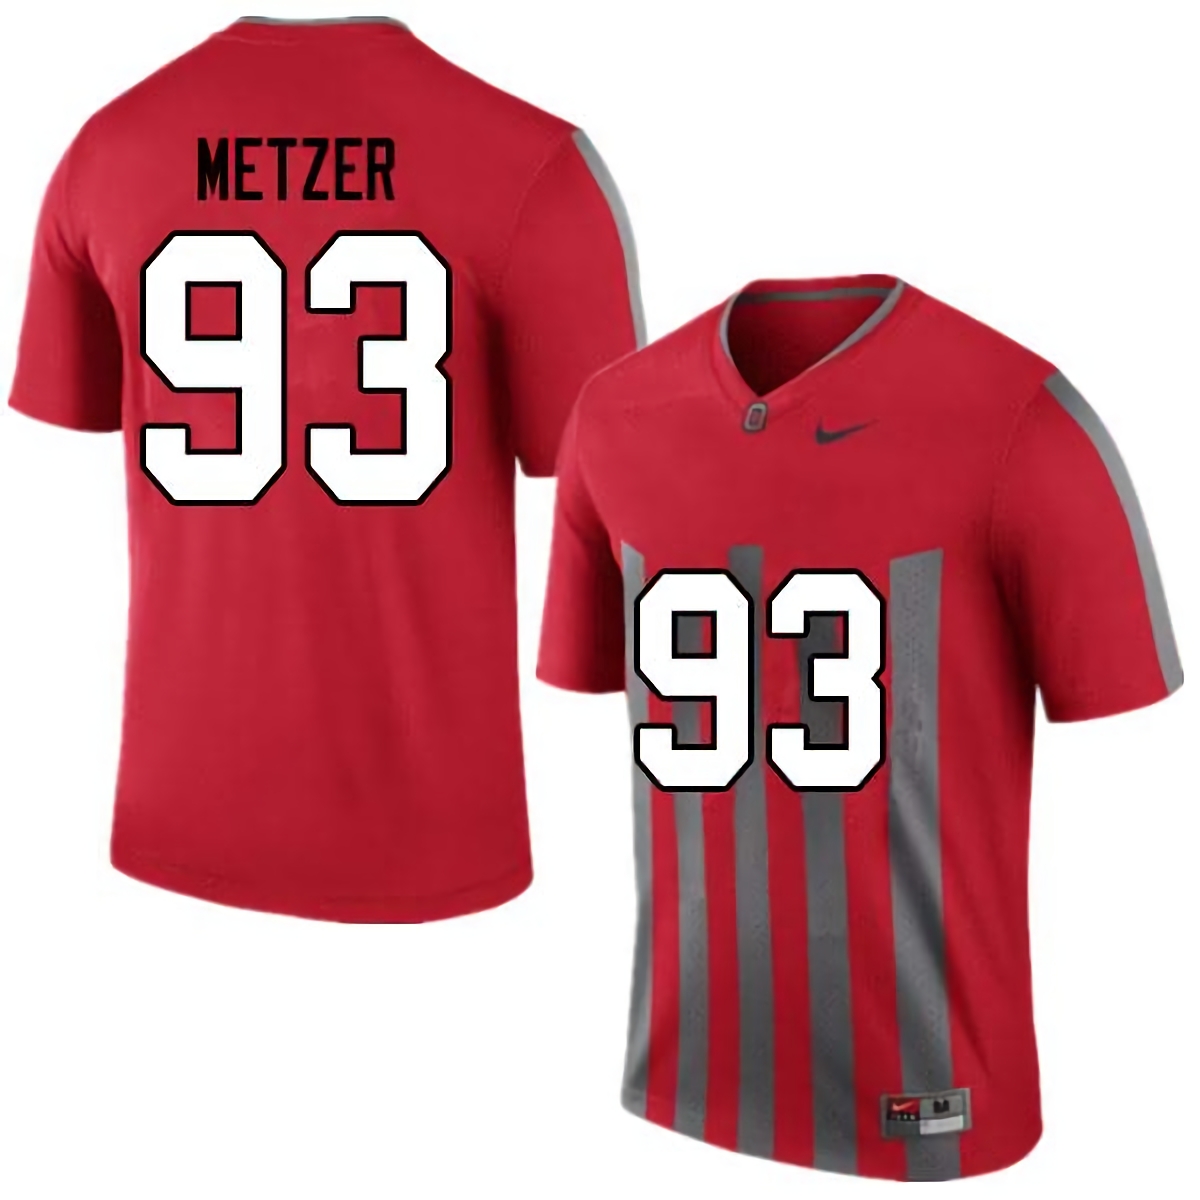 Jake Metzer Ohio State Buckeyes Men's NCAA #93 Nike Throwback Red College Stitched Football Jersey WES4656RY